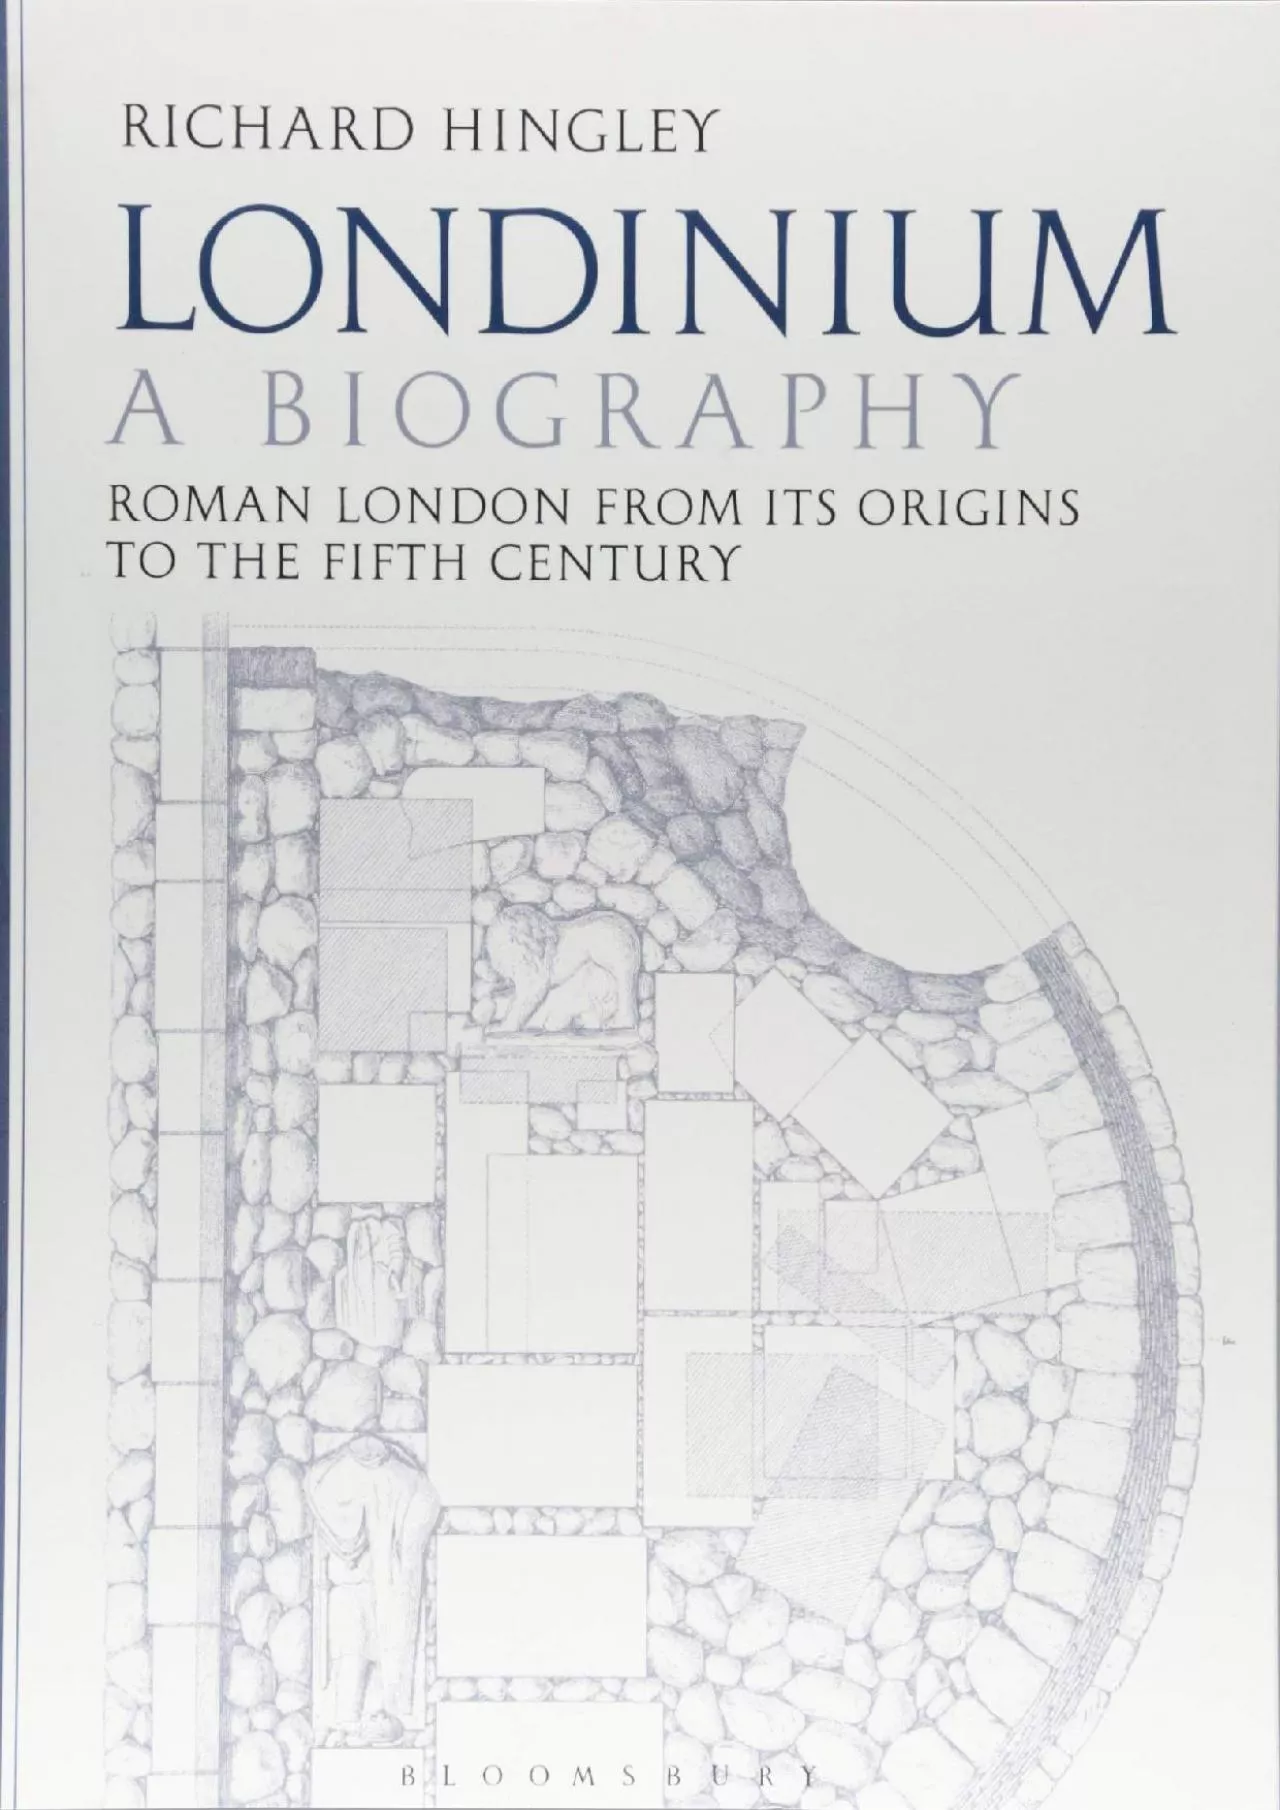 (BOOK)-Londinium: A Biography: Roman London from its Origins to the Fifth Century